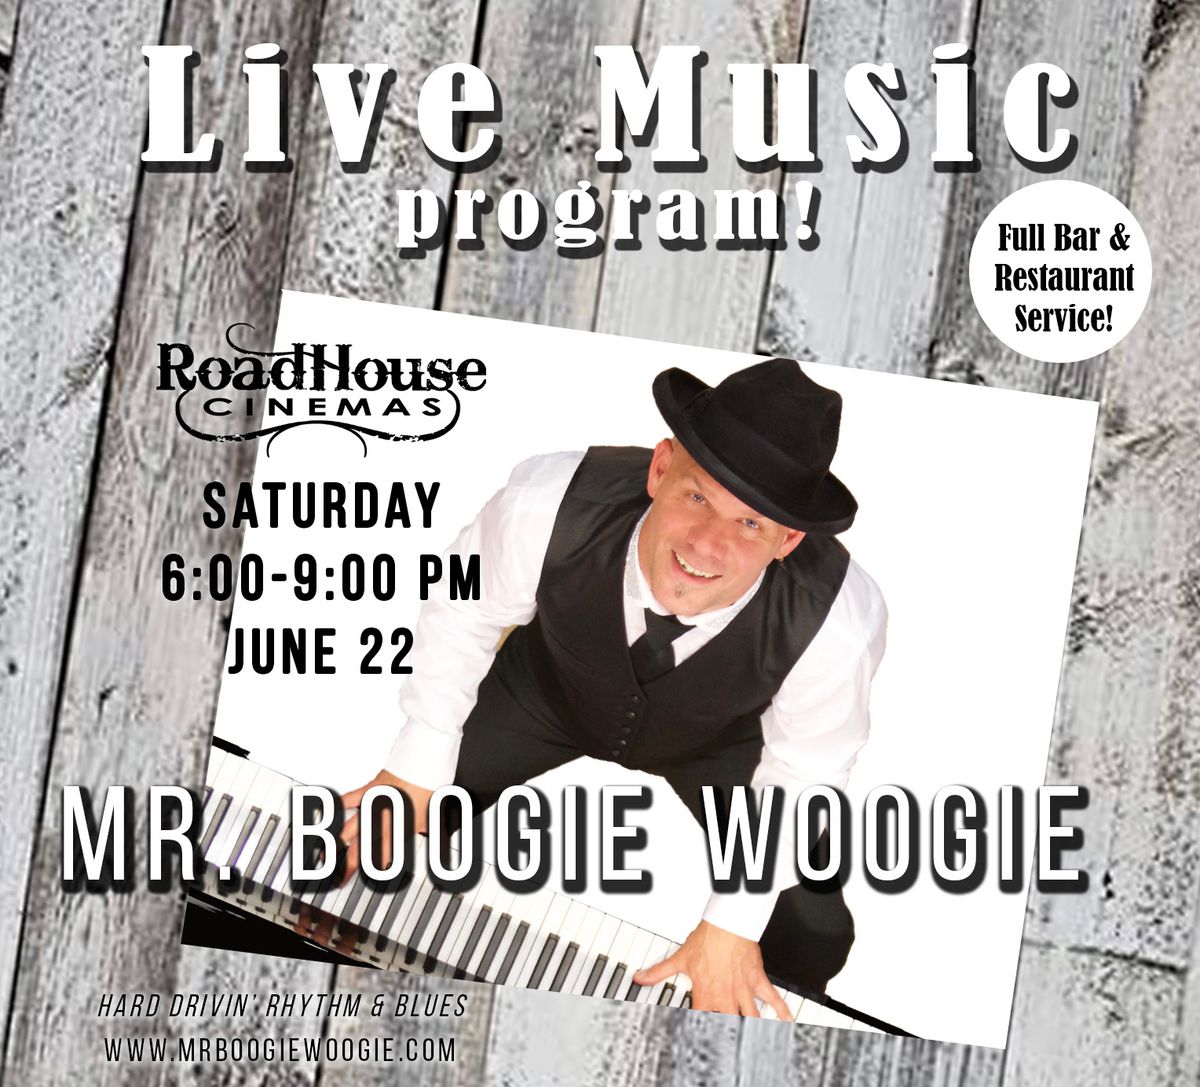 LIVE MUSIC SHOW featuring MR. BOOGIE WOOGIE!